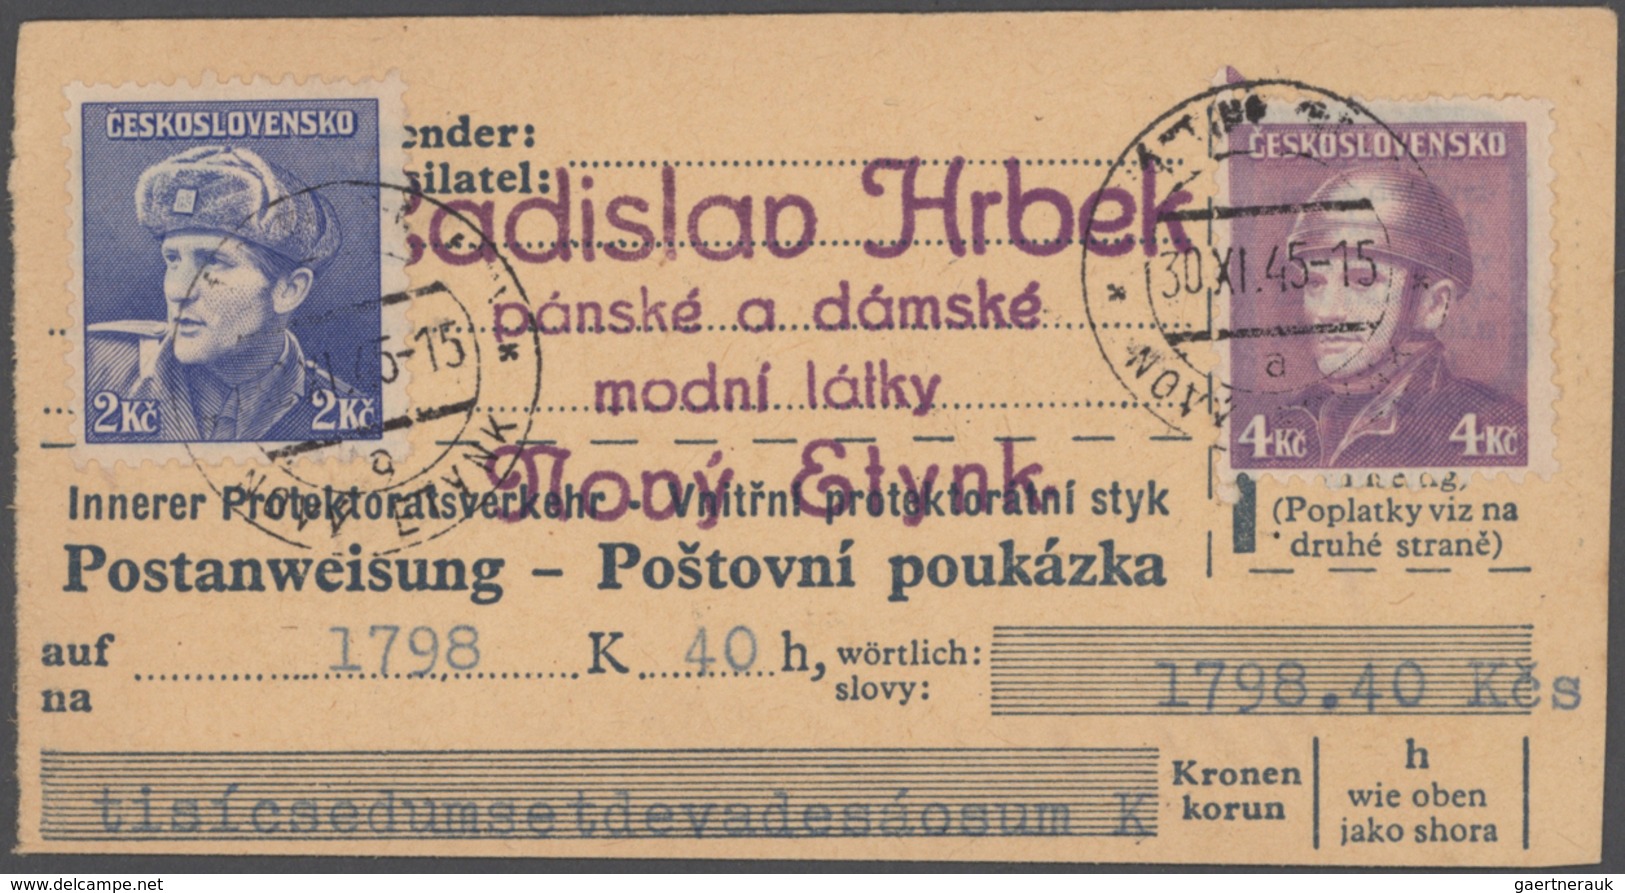 Tschechoslowakei - Stempel: 1945/1947, Transition period, comprehensive collection/accumualtion of f